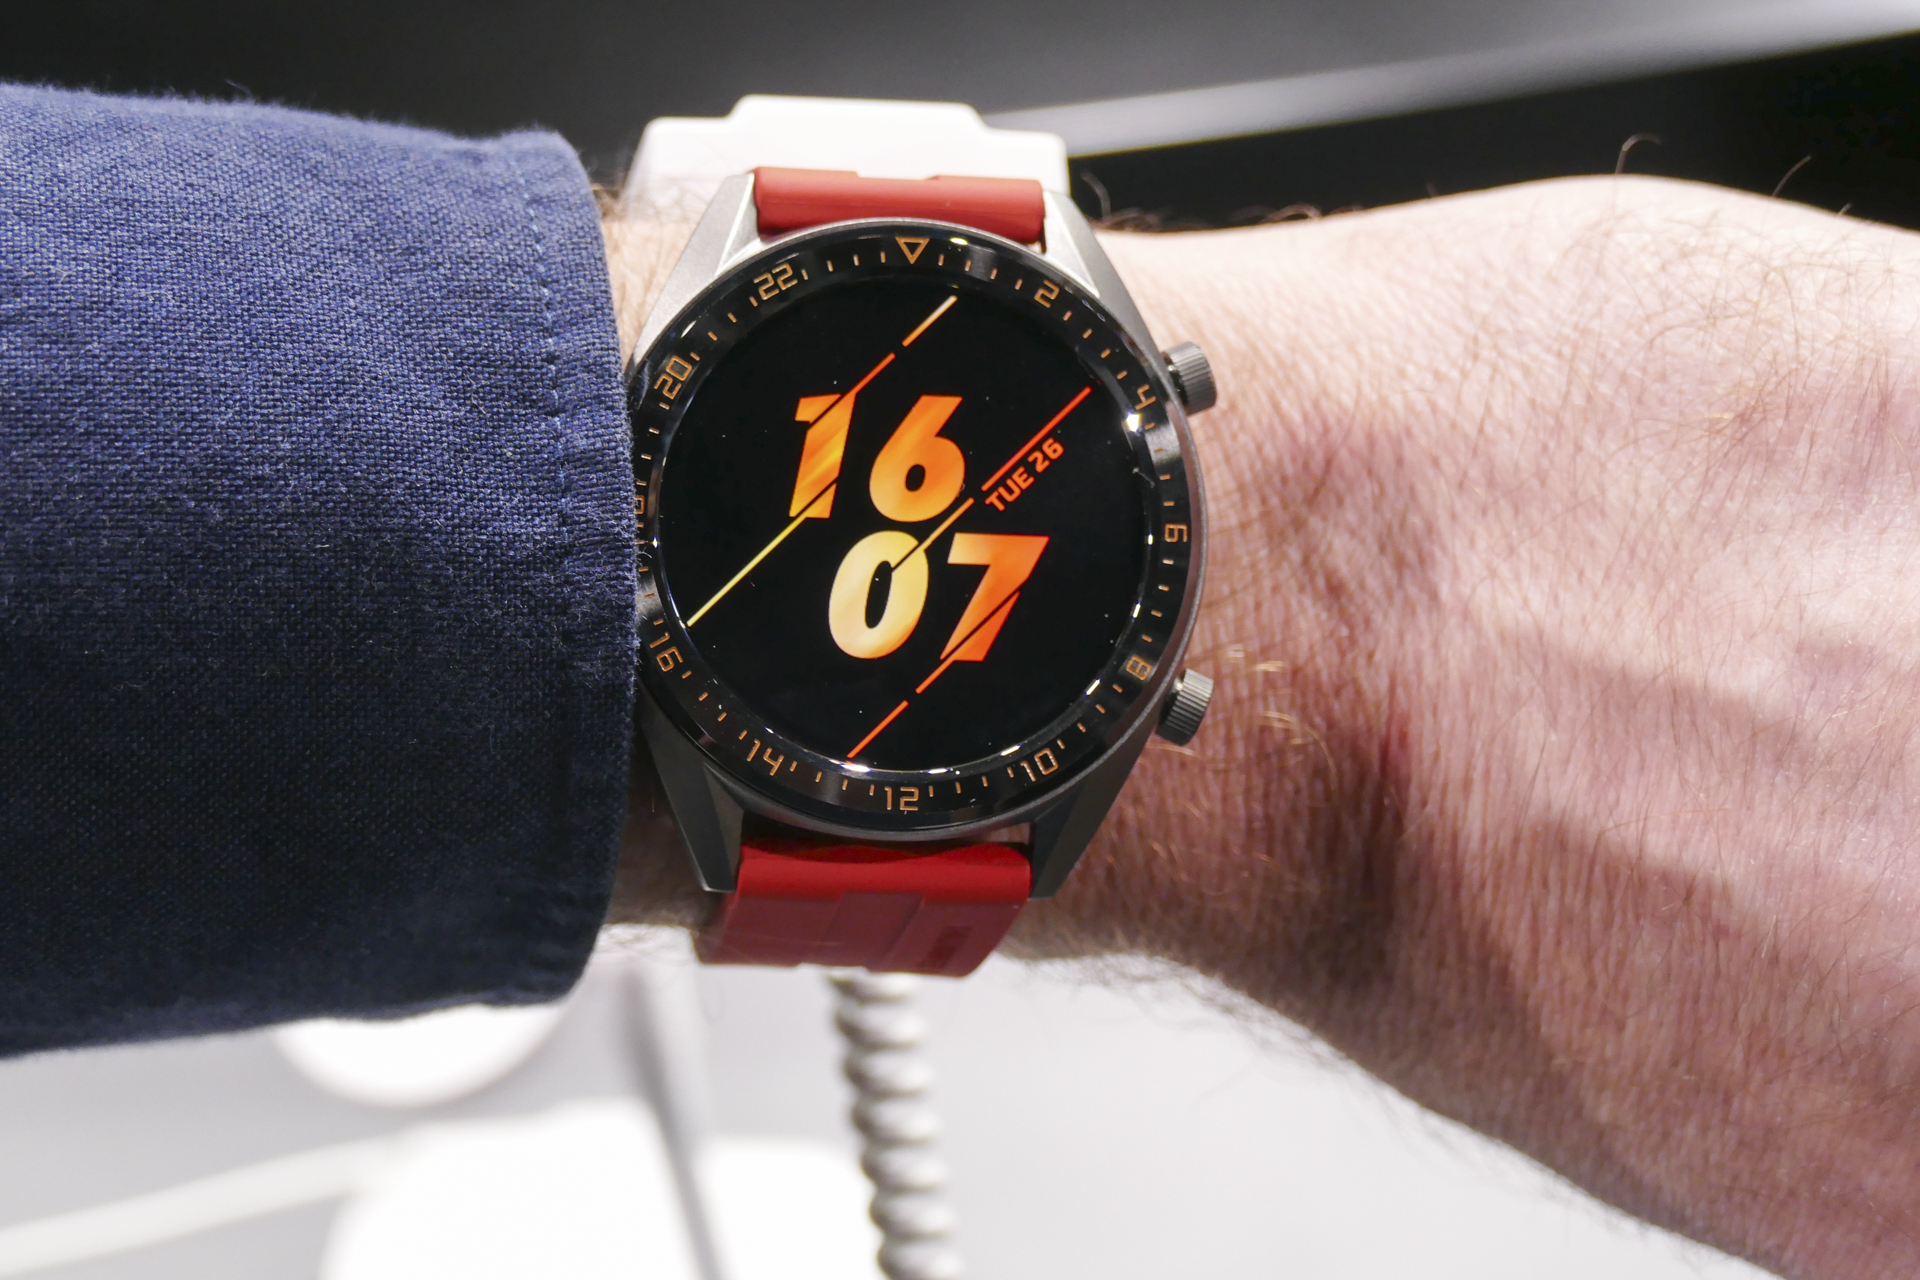 Huawei Watch GT Hands-on Review: It's Got The Look | Digital Trends